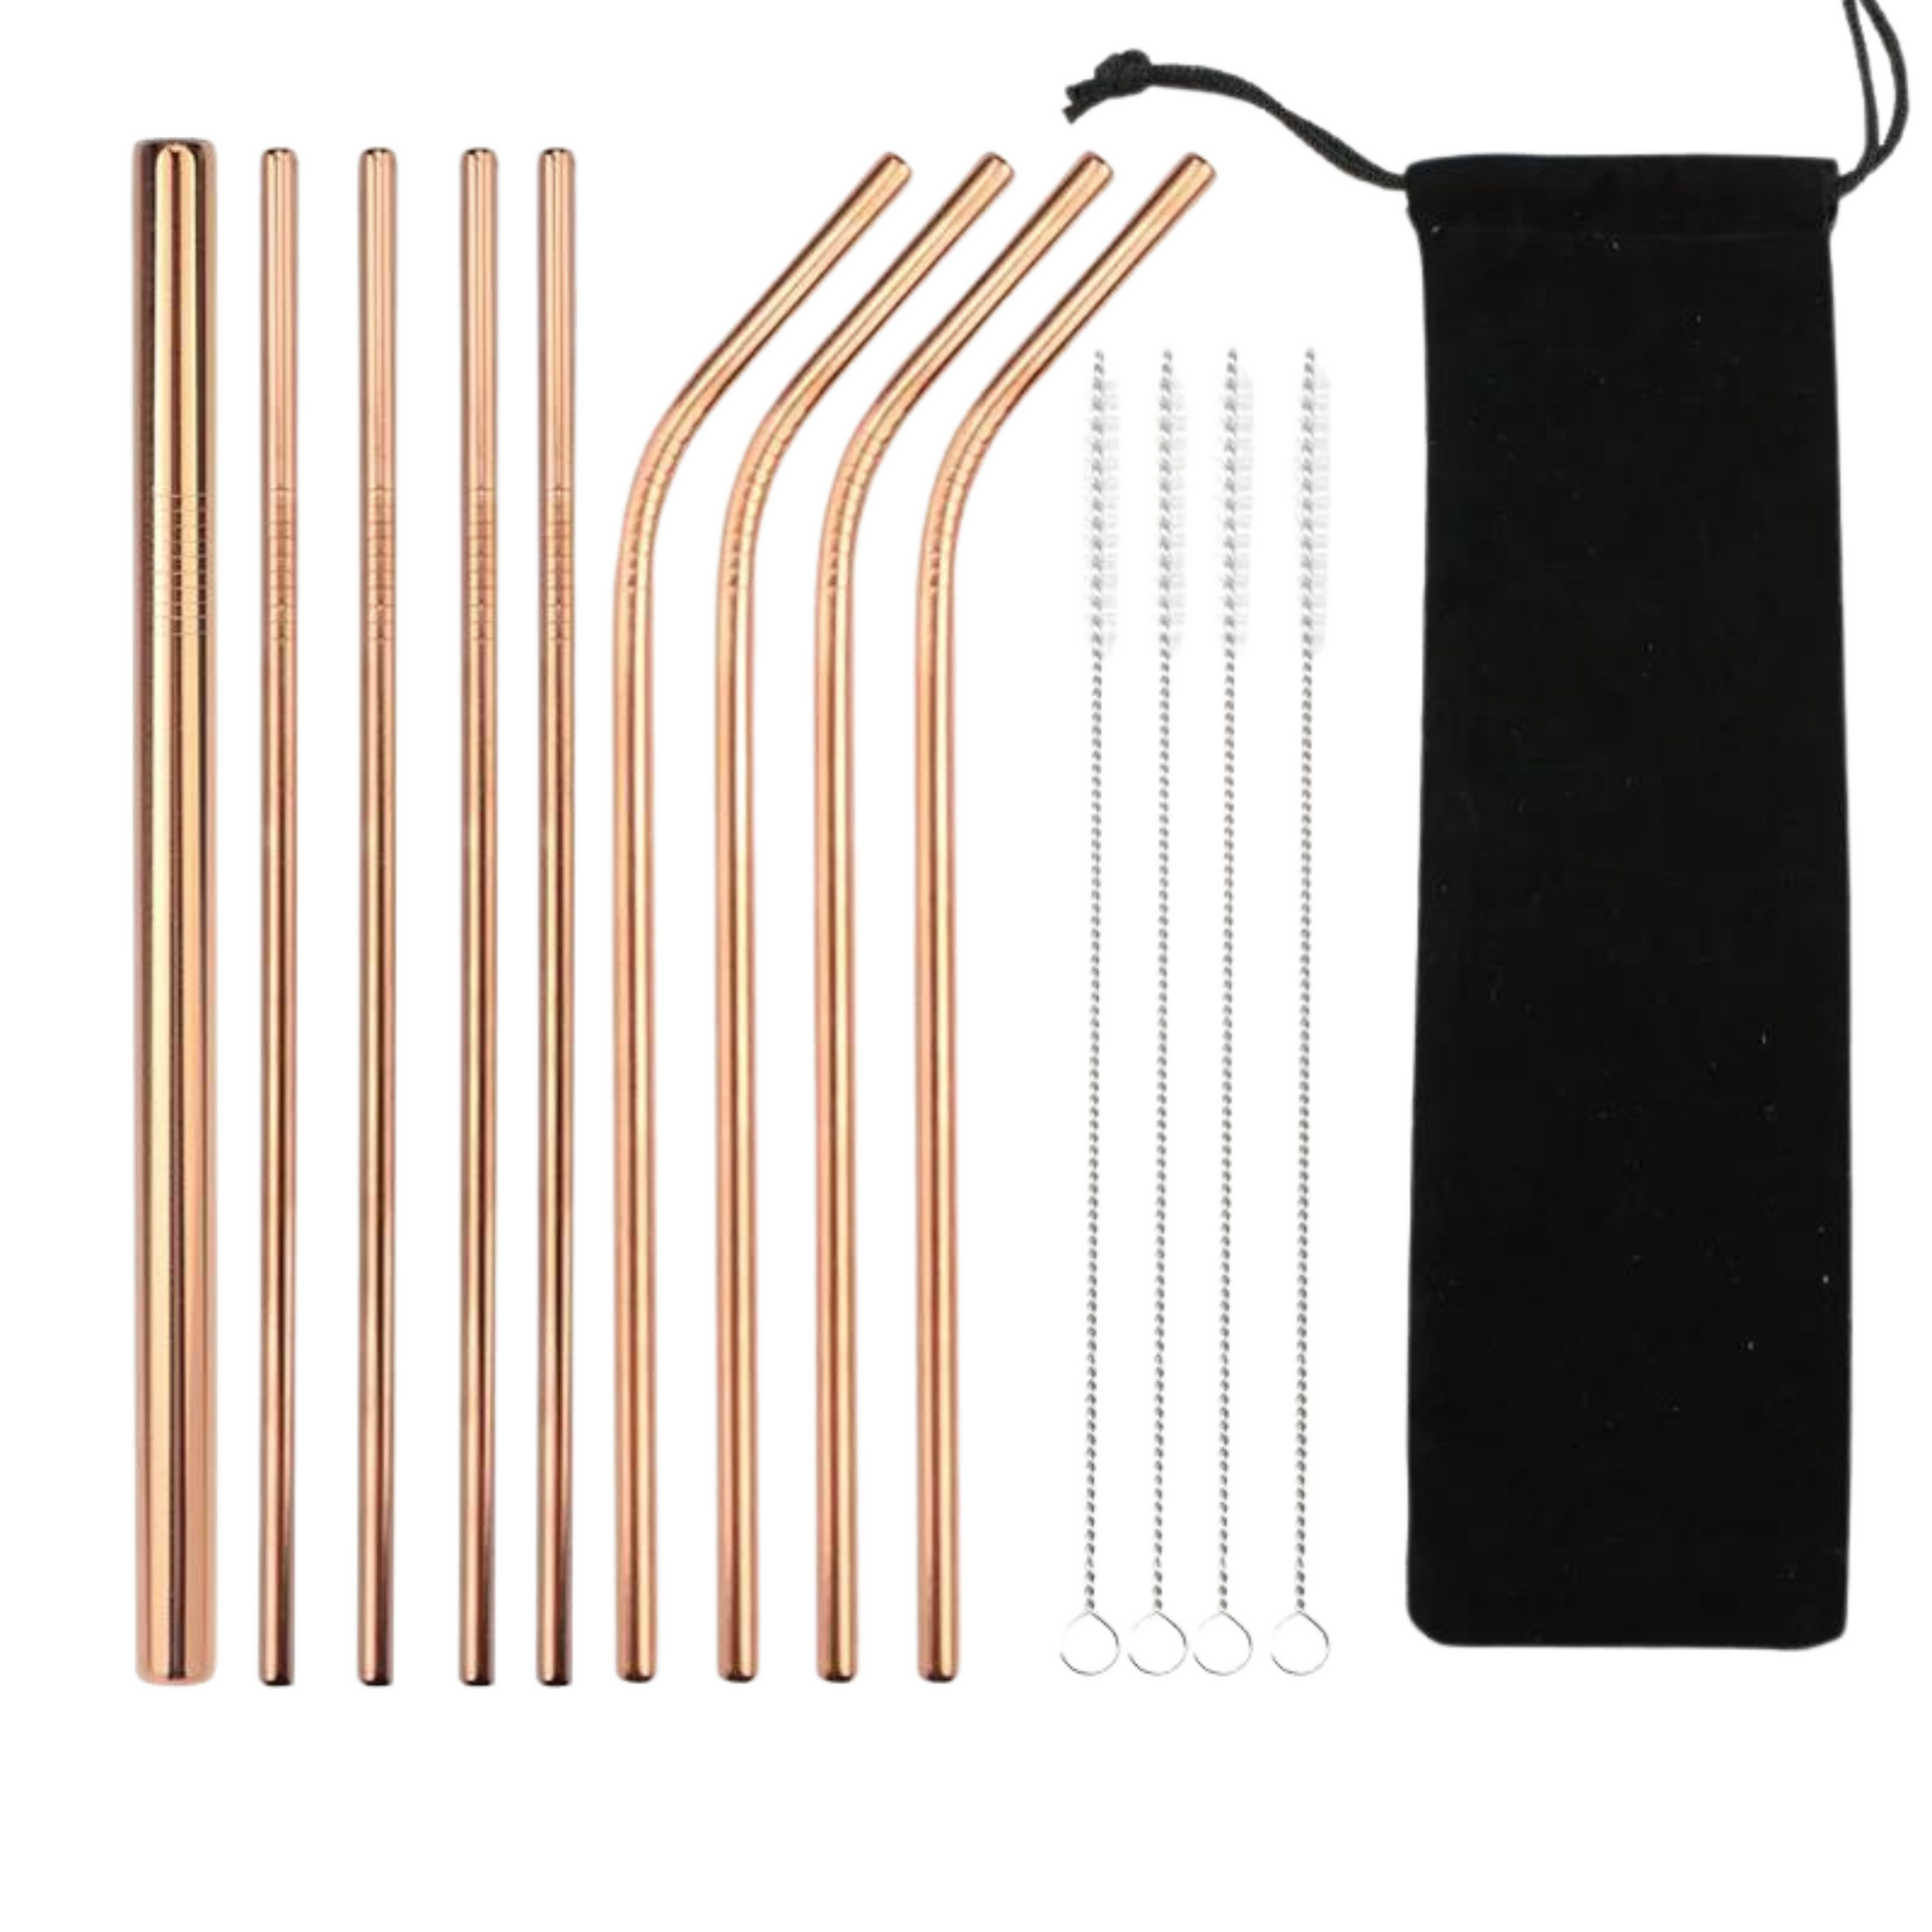 9 gold Stainless Steel Reusable Straws with  cleaning brushes and a bag